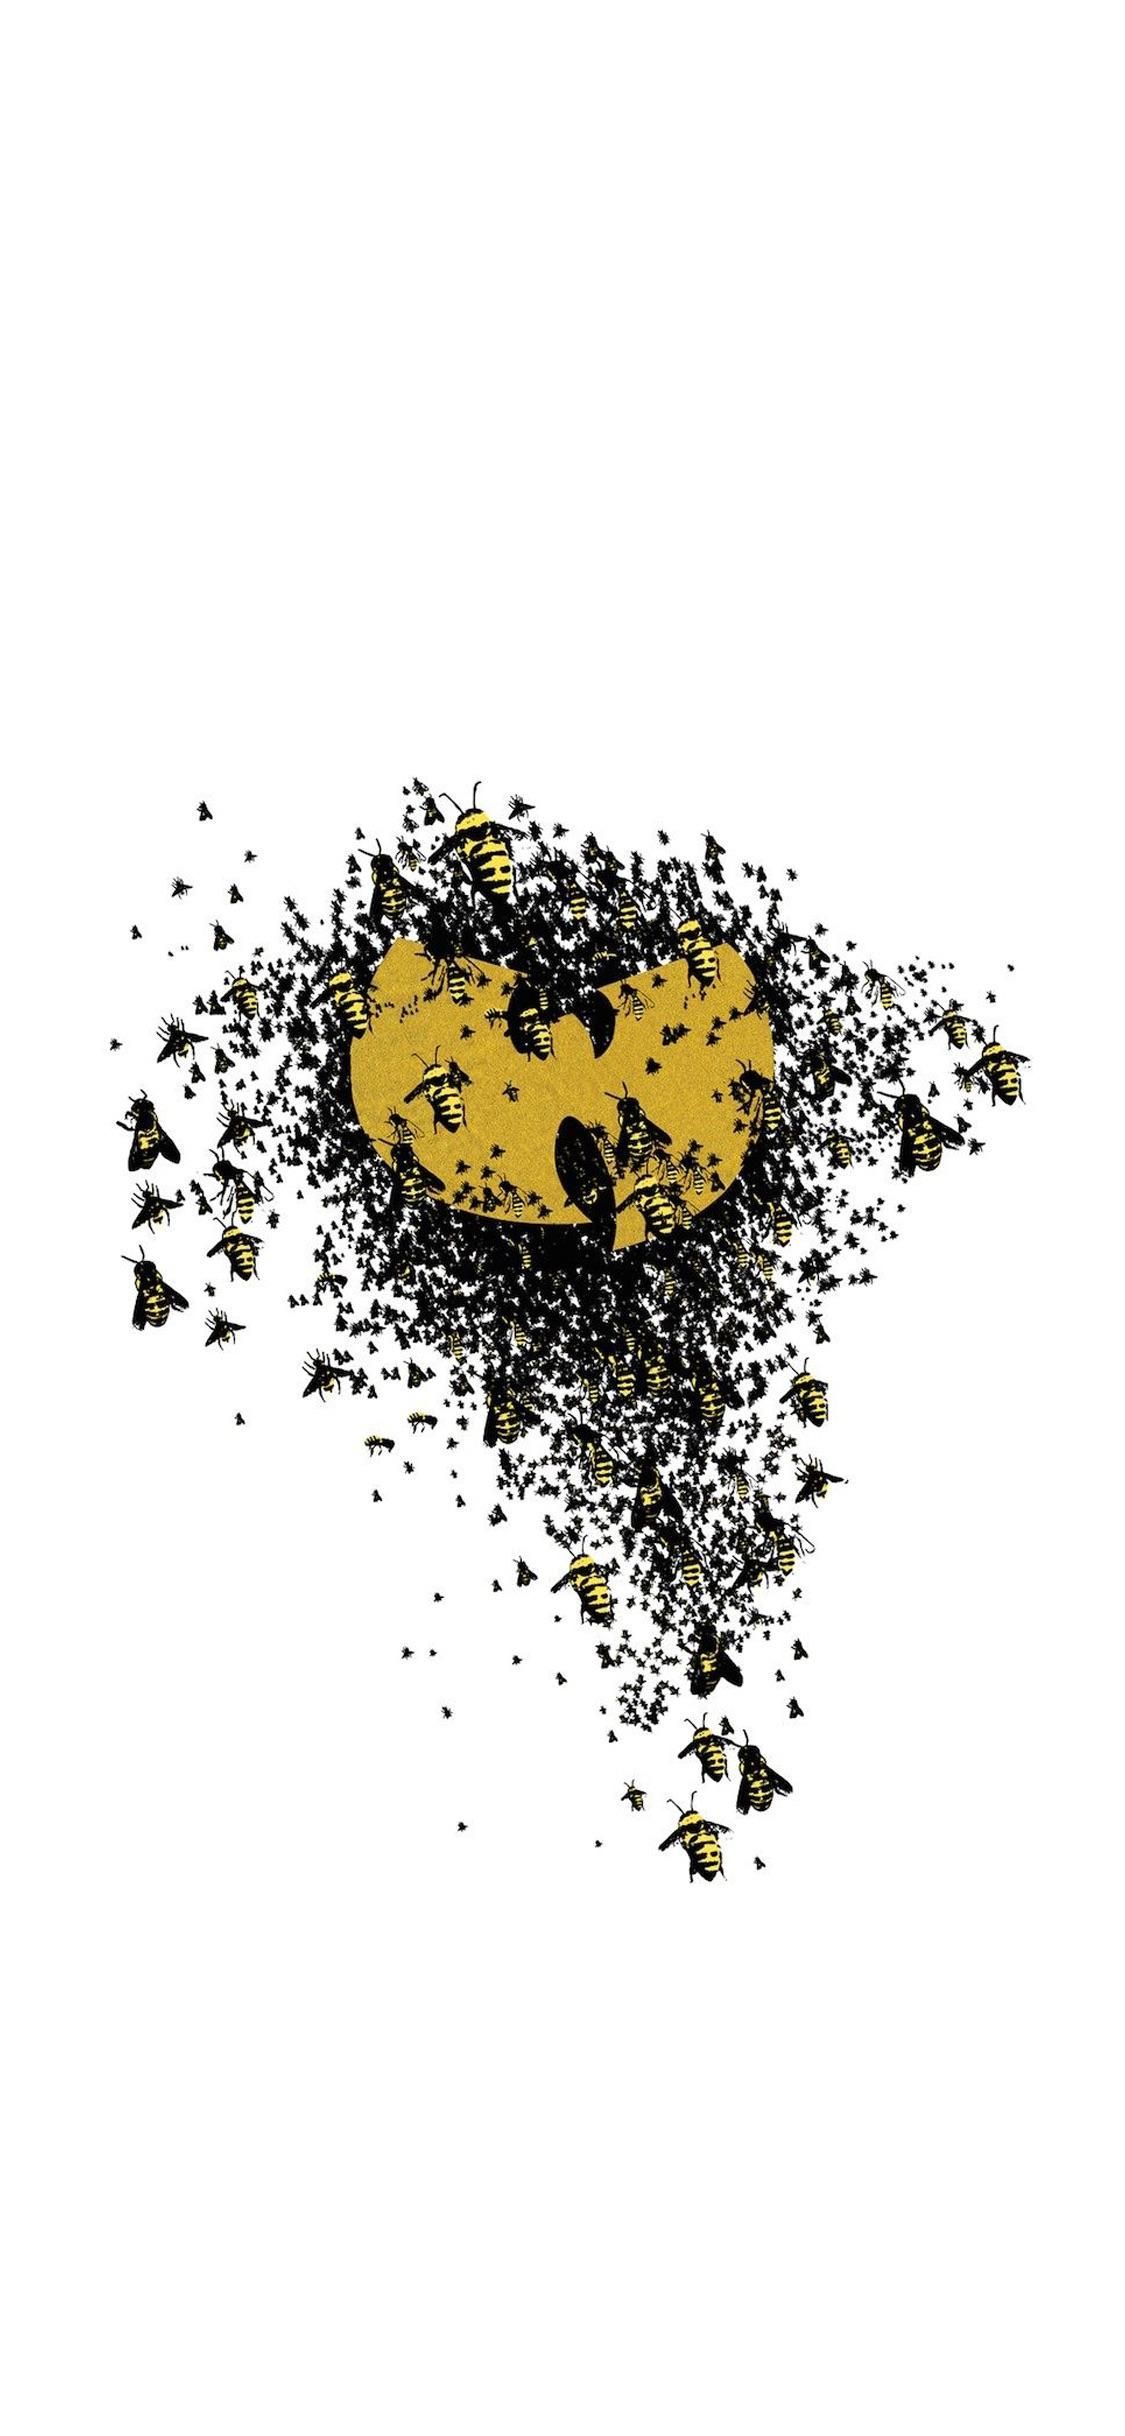 Wu Tang Art, Cropped, Chopped And Edited For The IPhone Xs Max. Feel Free To Save And. IPhone Wallpaper HD Original, IPhone Wallpaper, IPhone Wallpaper